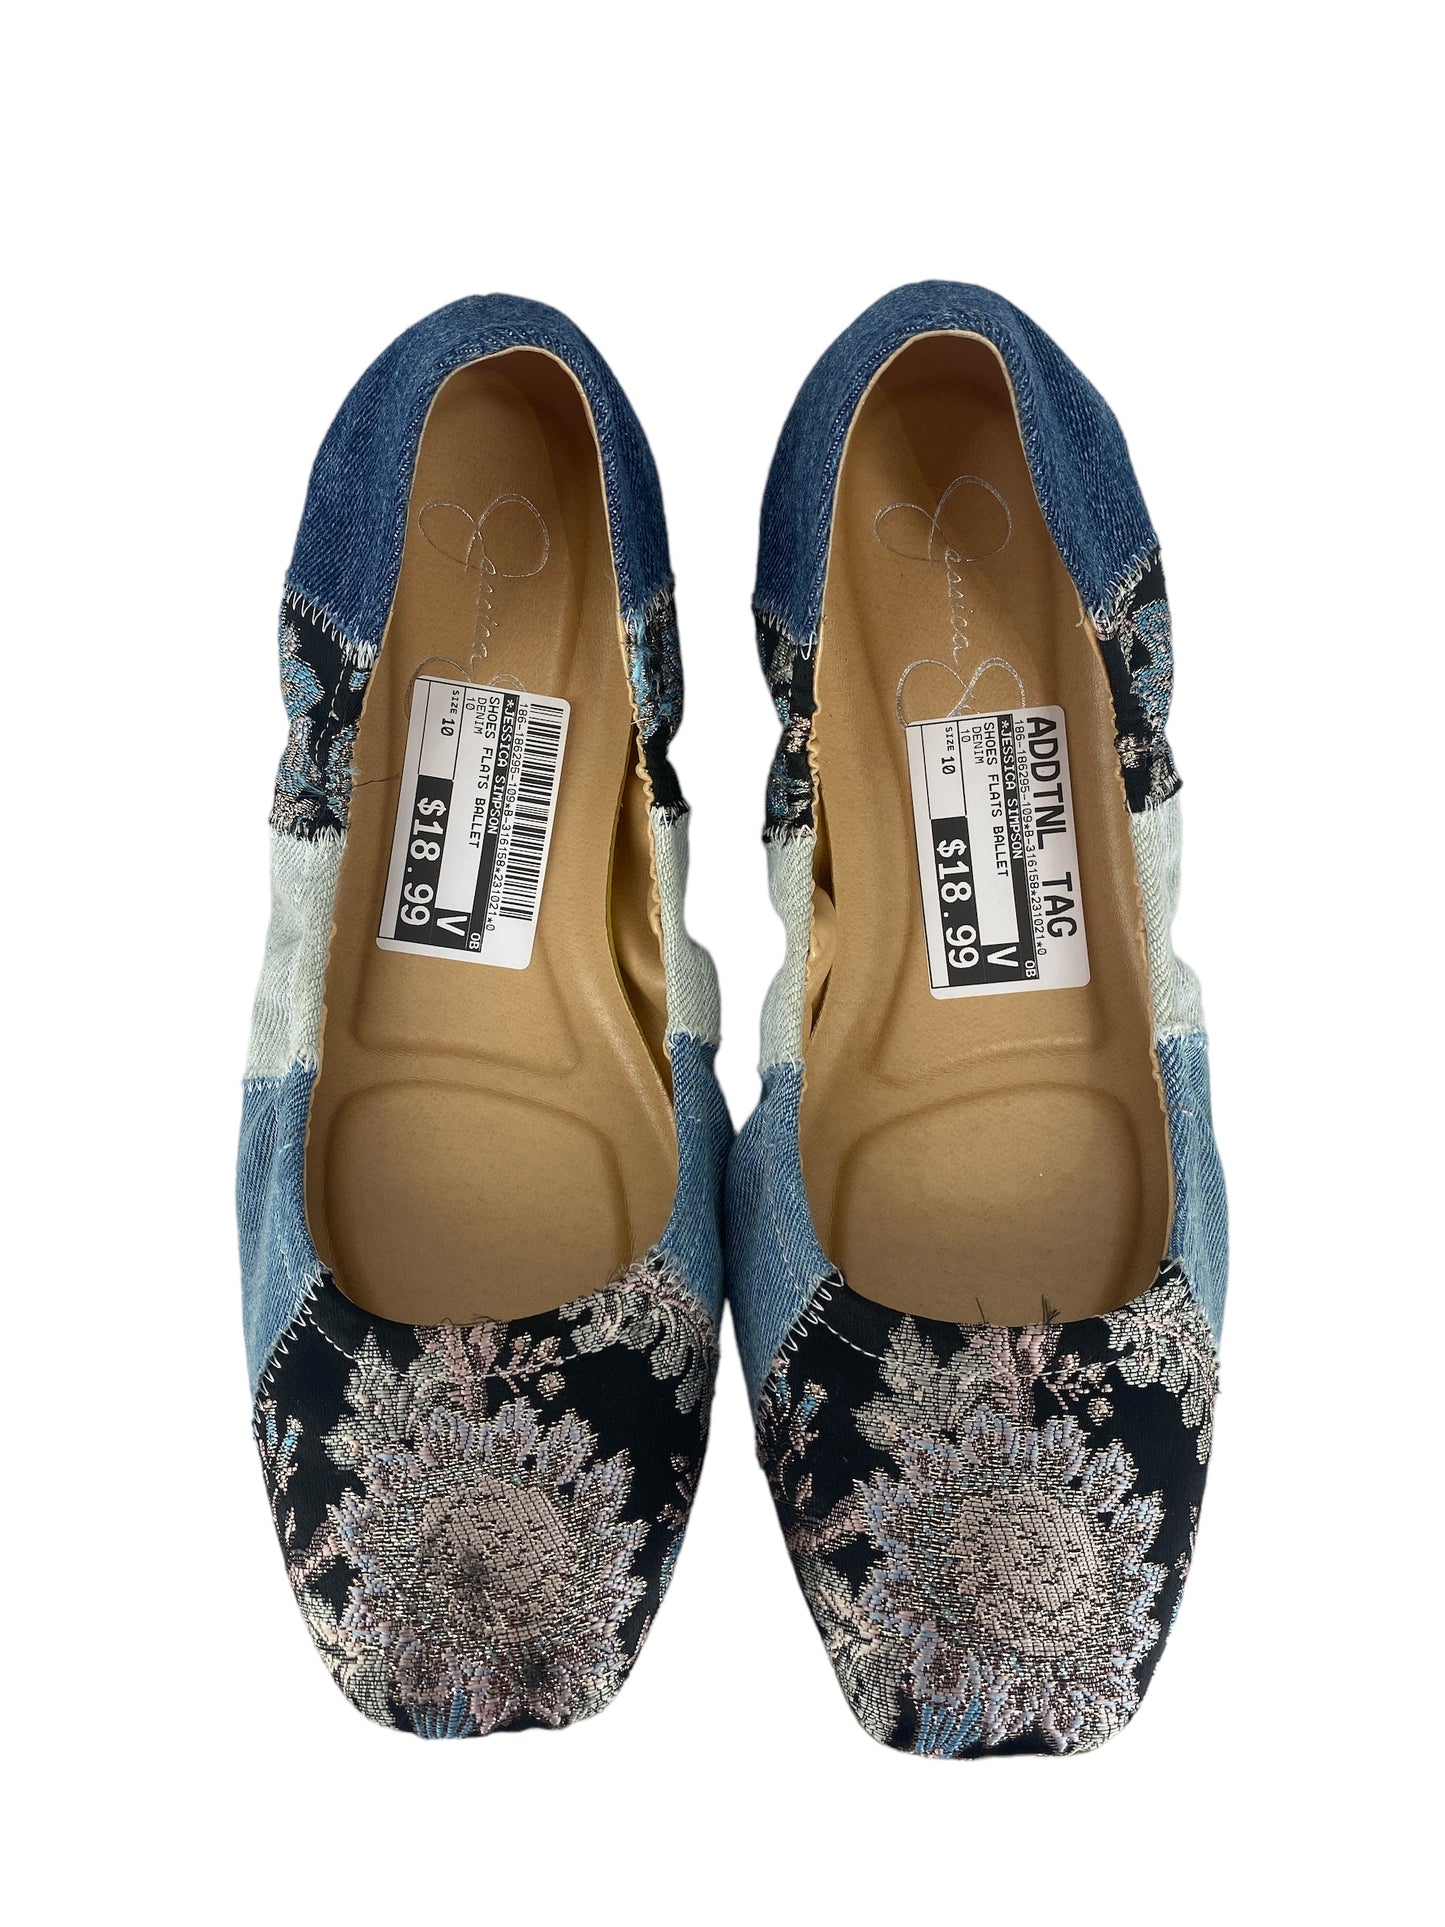 Shoes Flats Ballet By Jessica Simpson  Size: 10